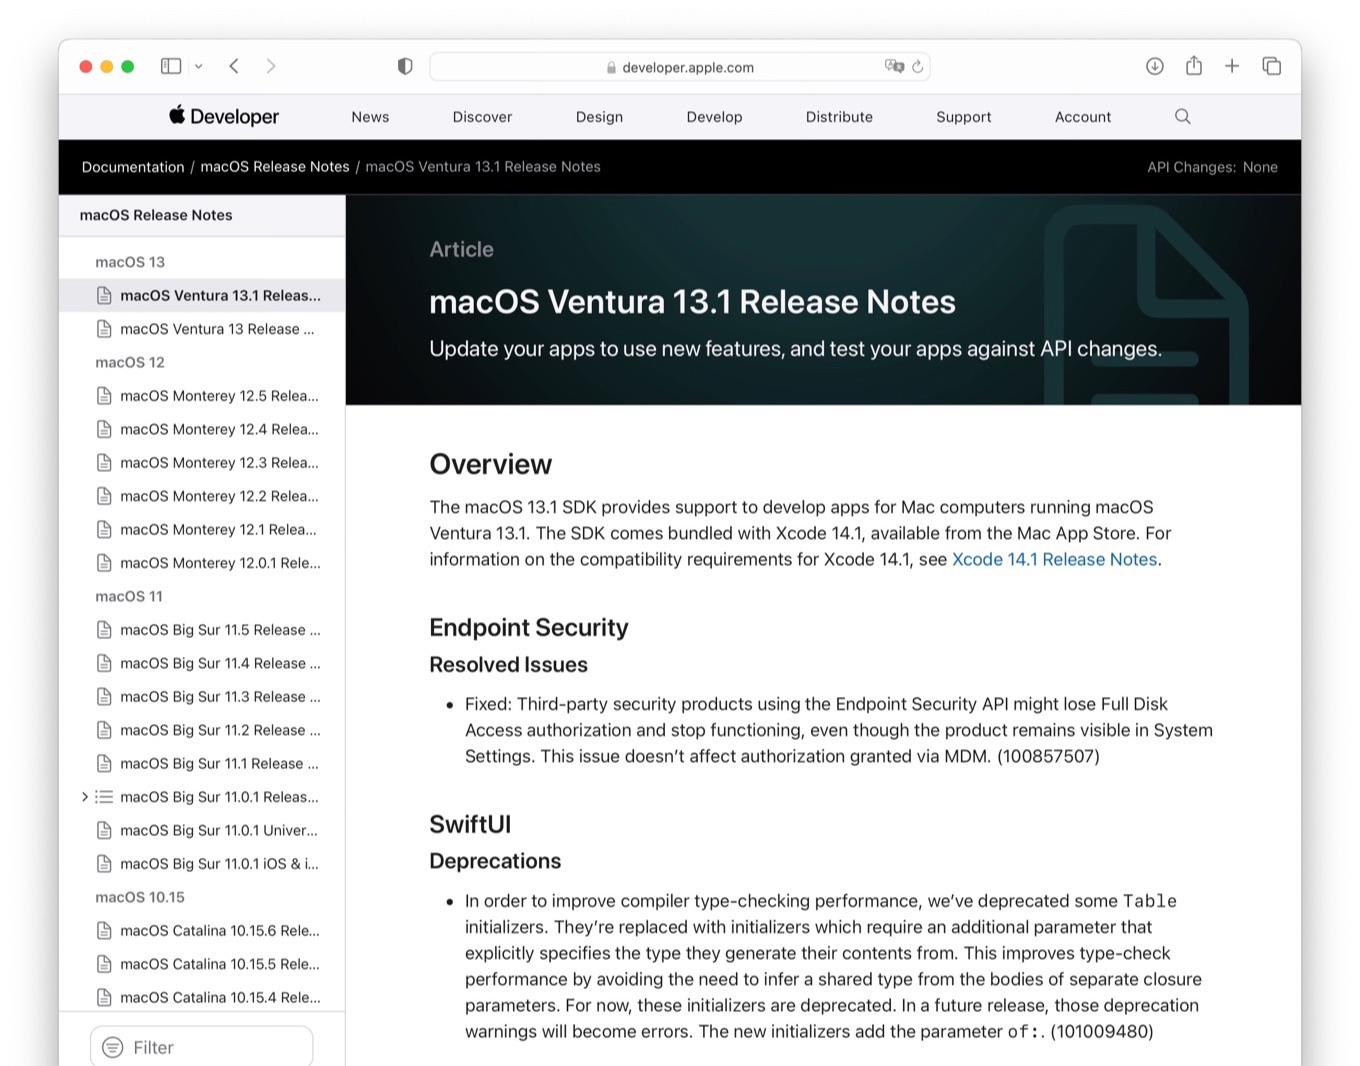 macOS 13_1 Ventura Endpoint Security issue resolved